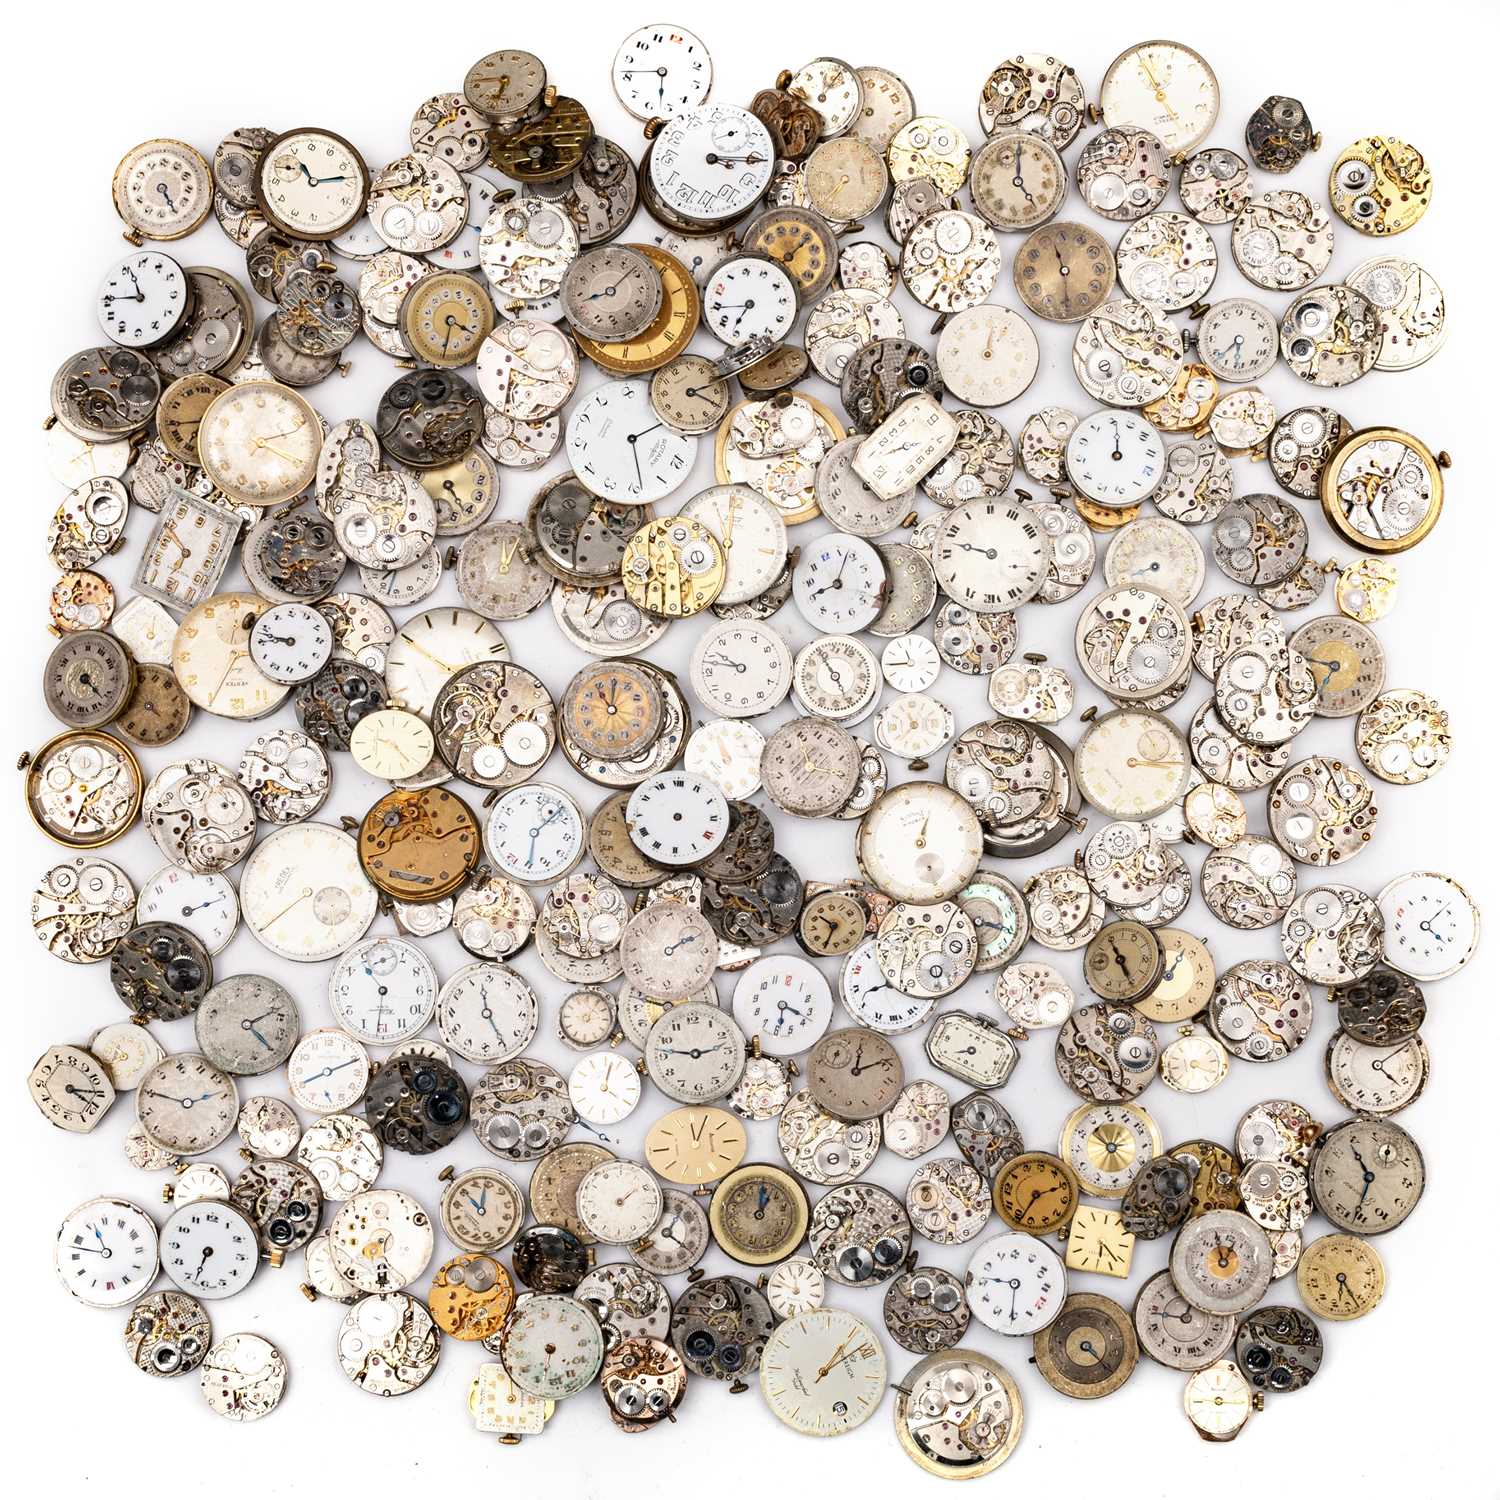 A LARGE COLLECTION OF WATCH MOVEMENTS